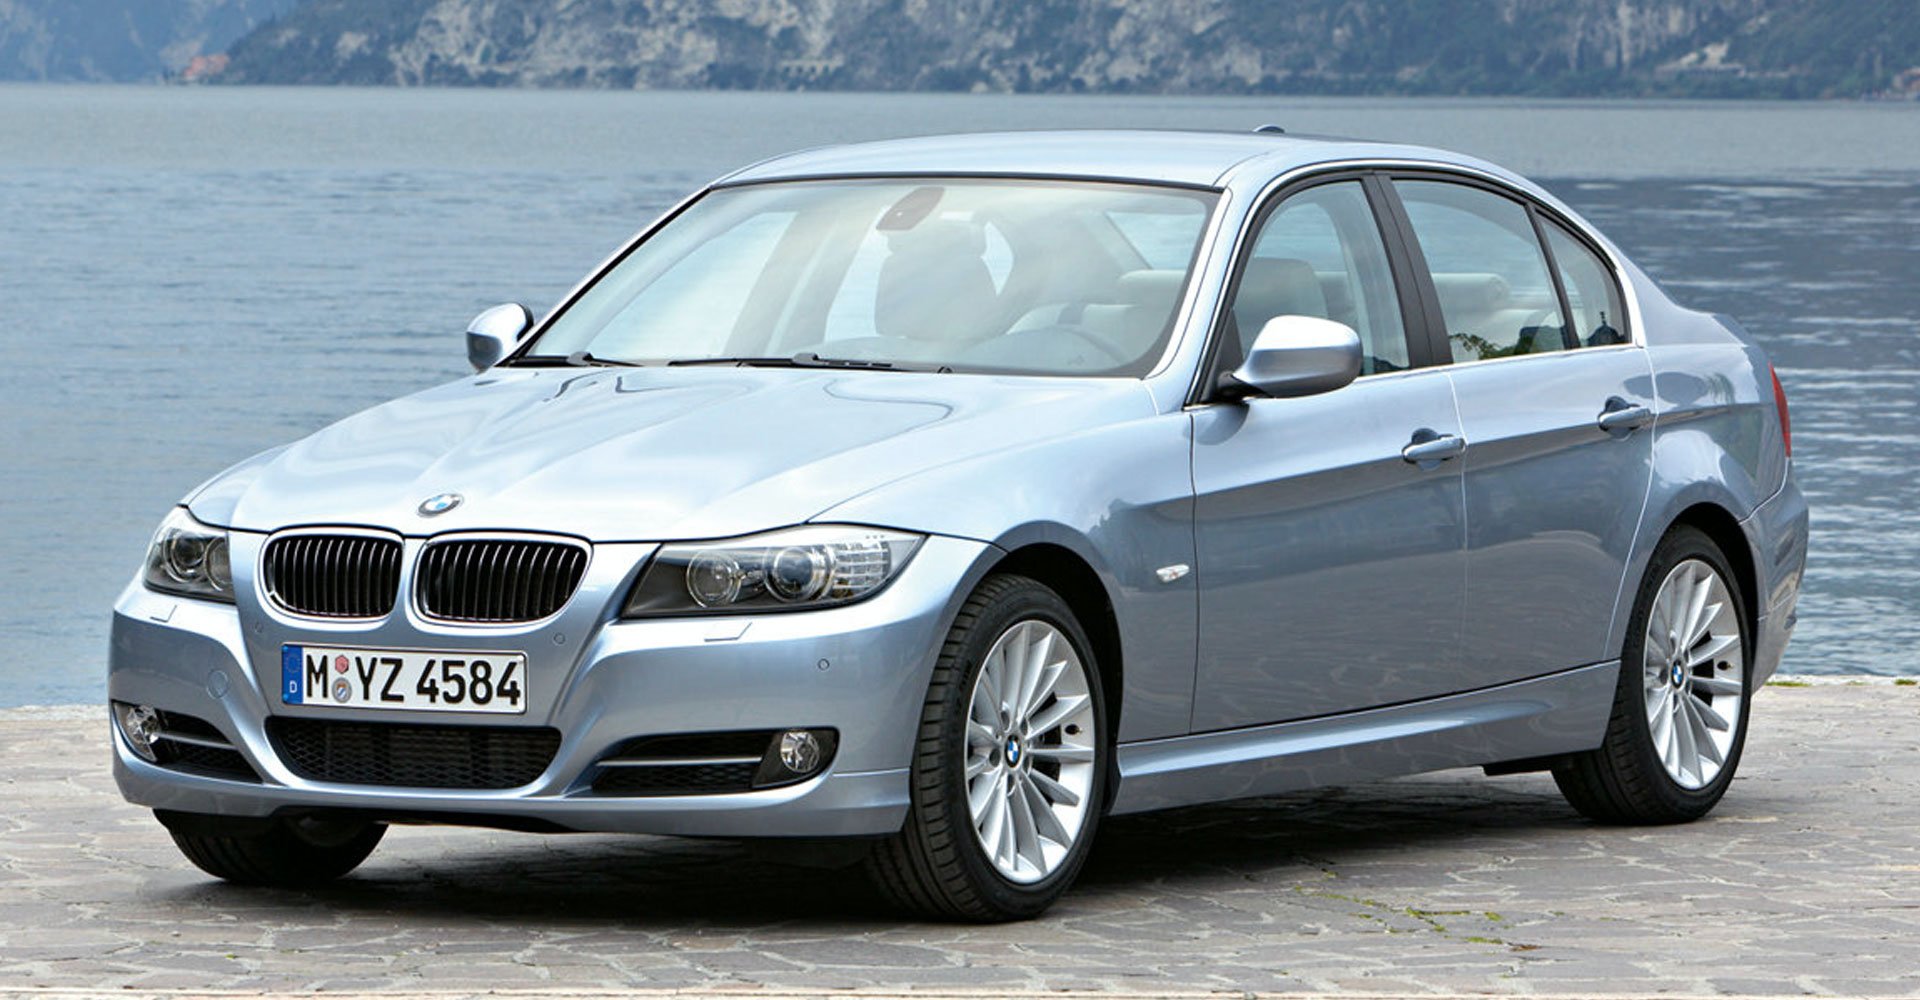 BMW E90 E91 E92 E93 M3 N54 N55 specs, news, and replacement parts